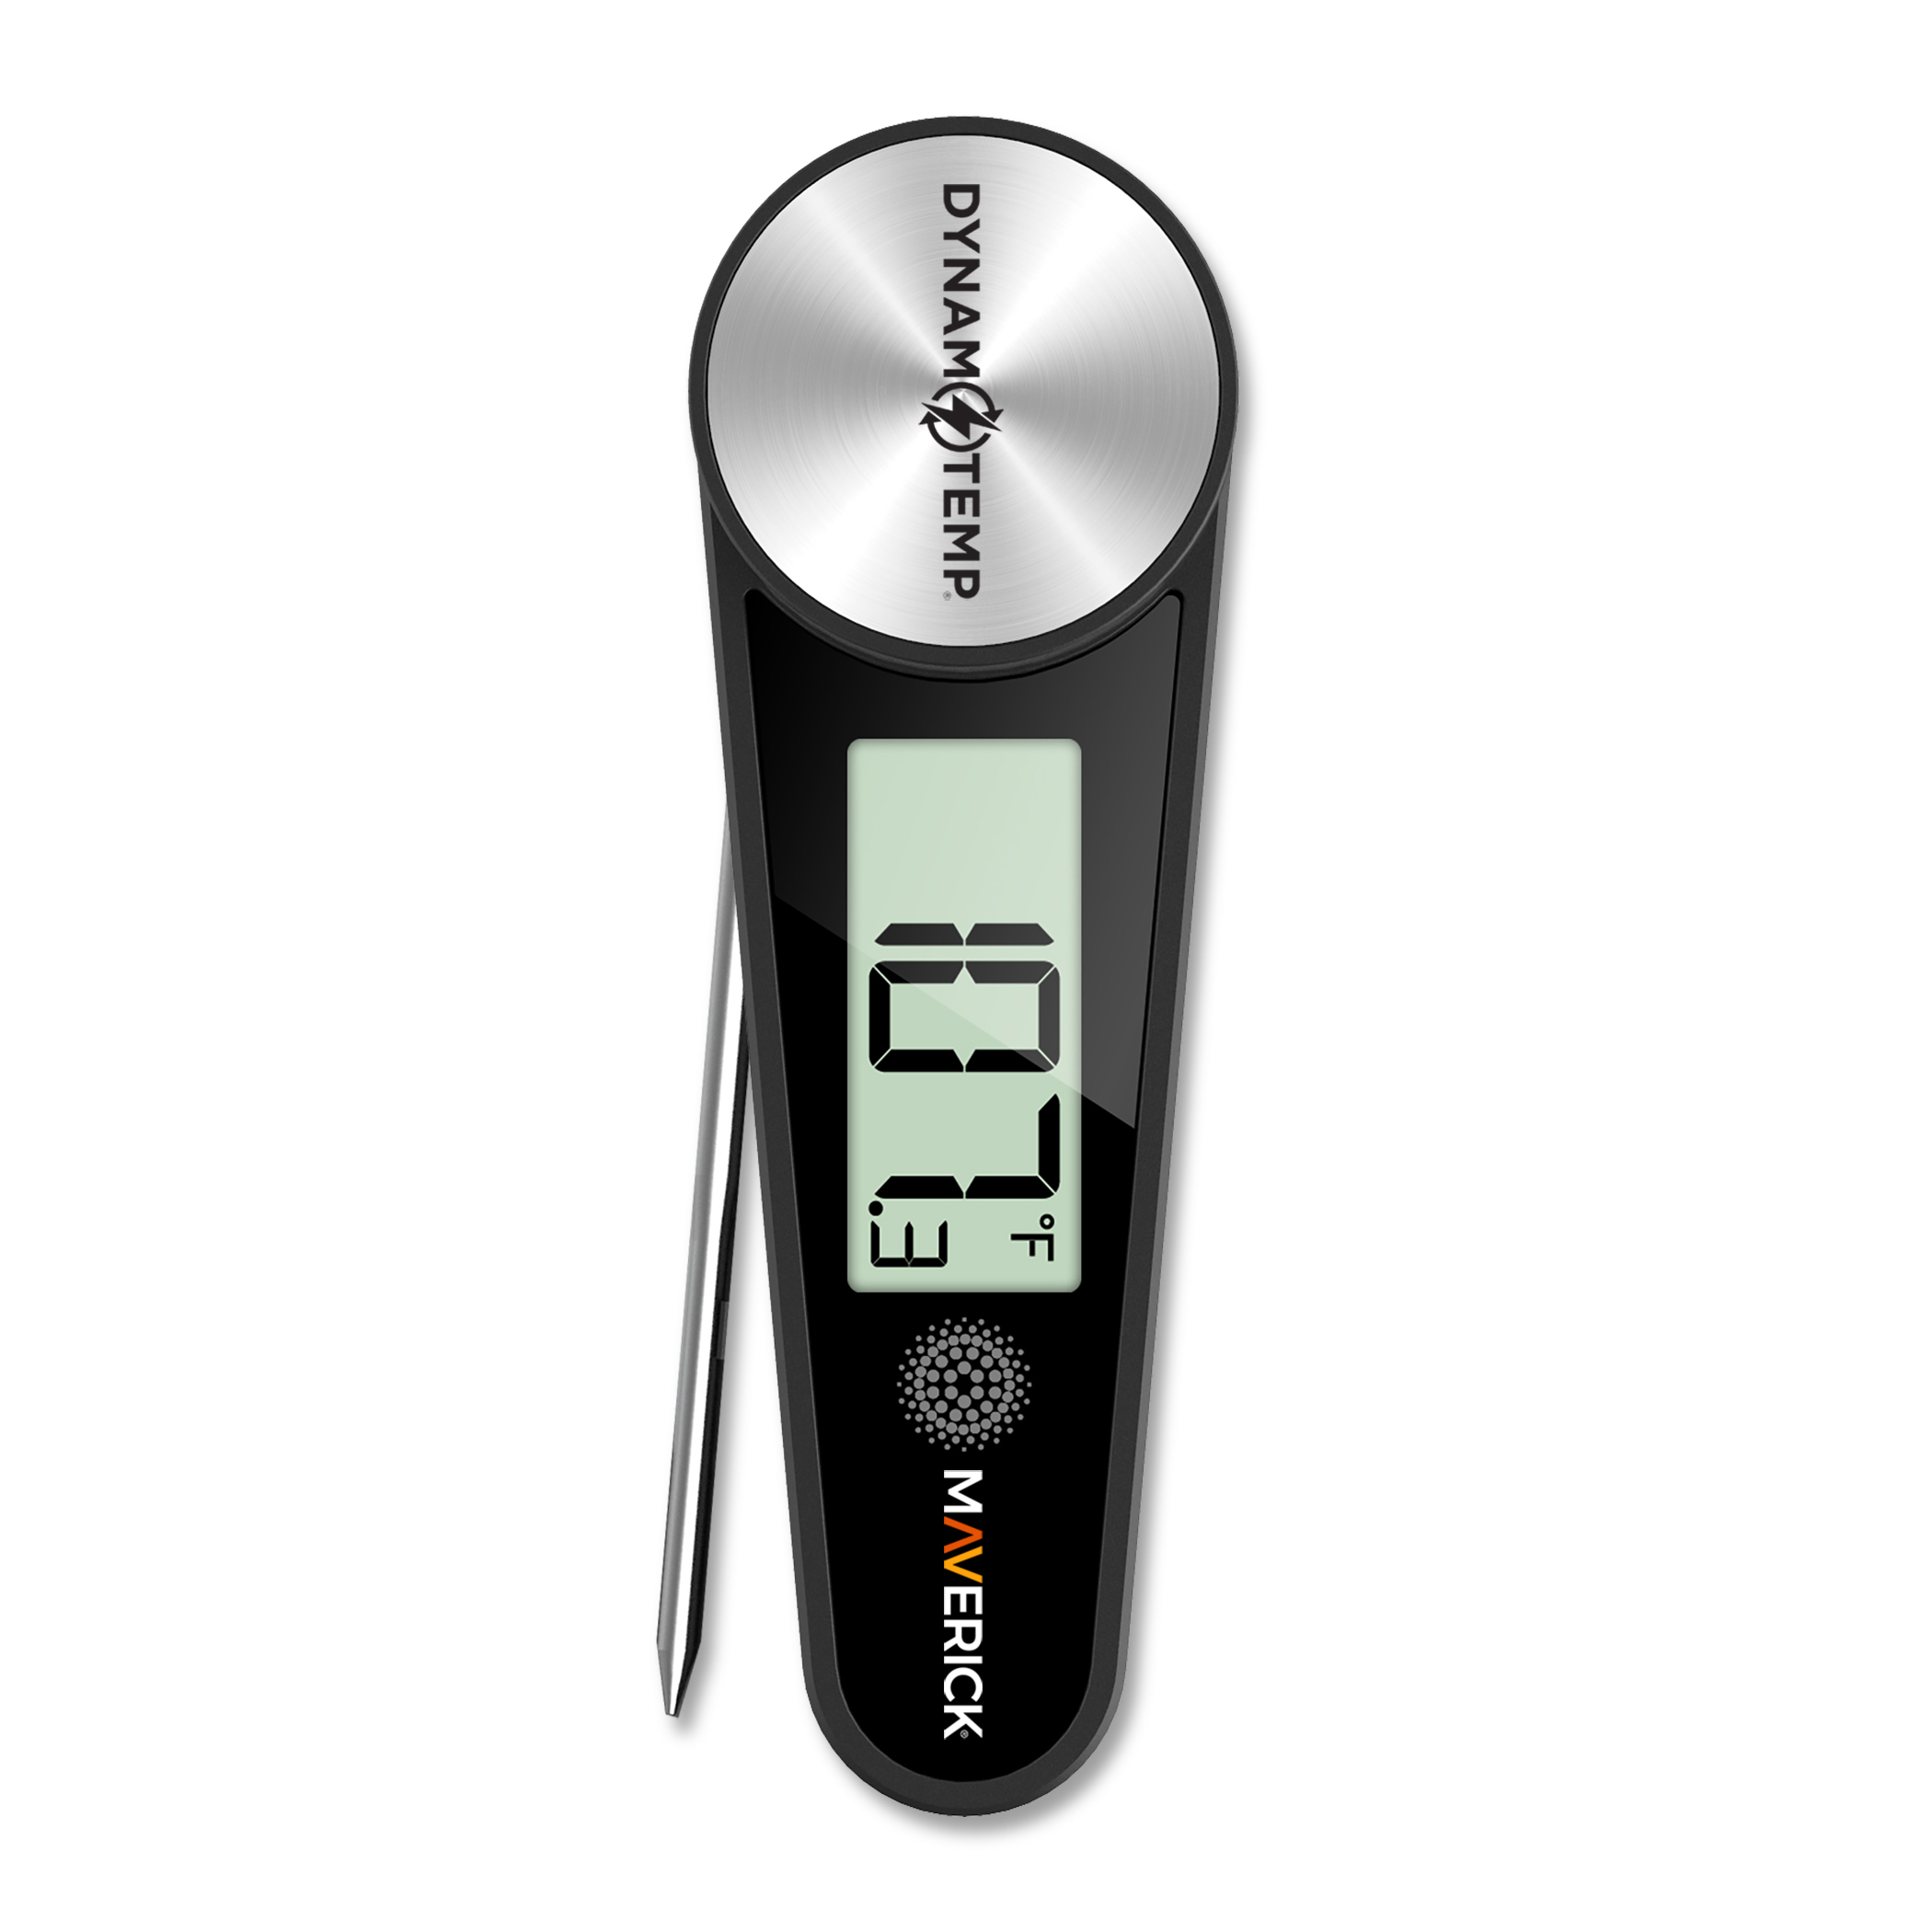 Digital Thermometer With Probe, Battery Powered With Magnets